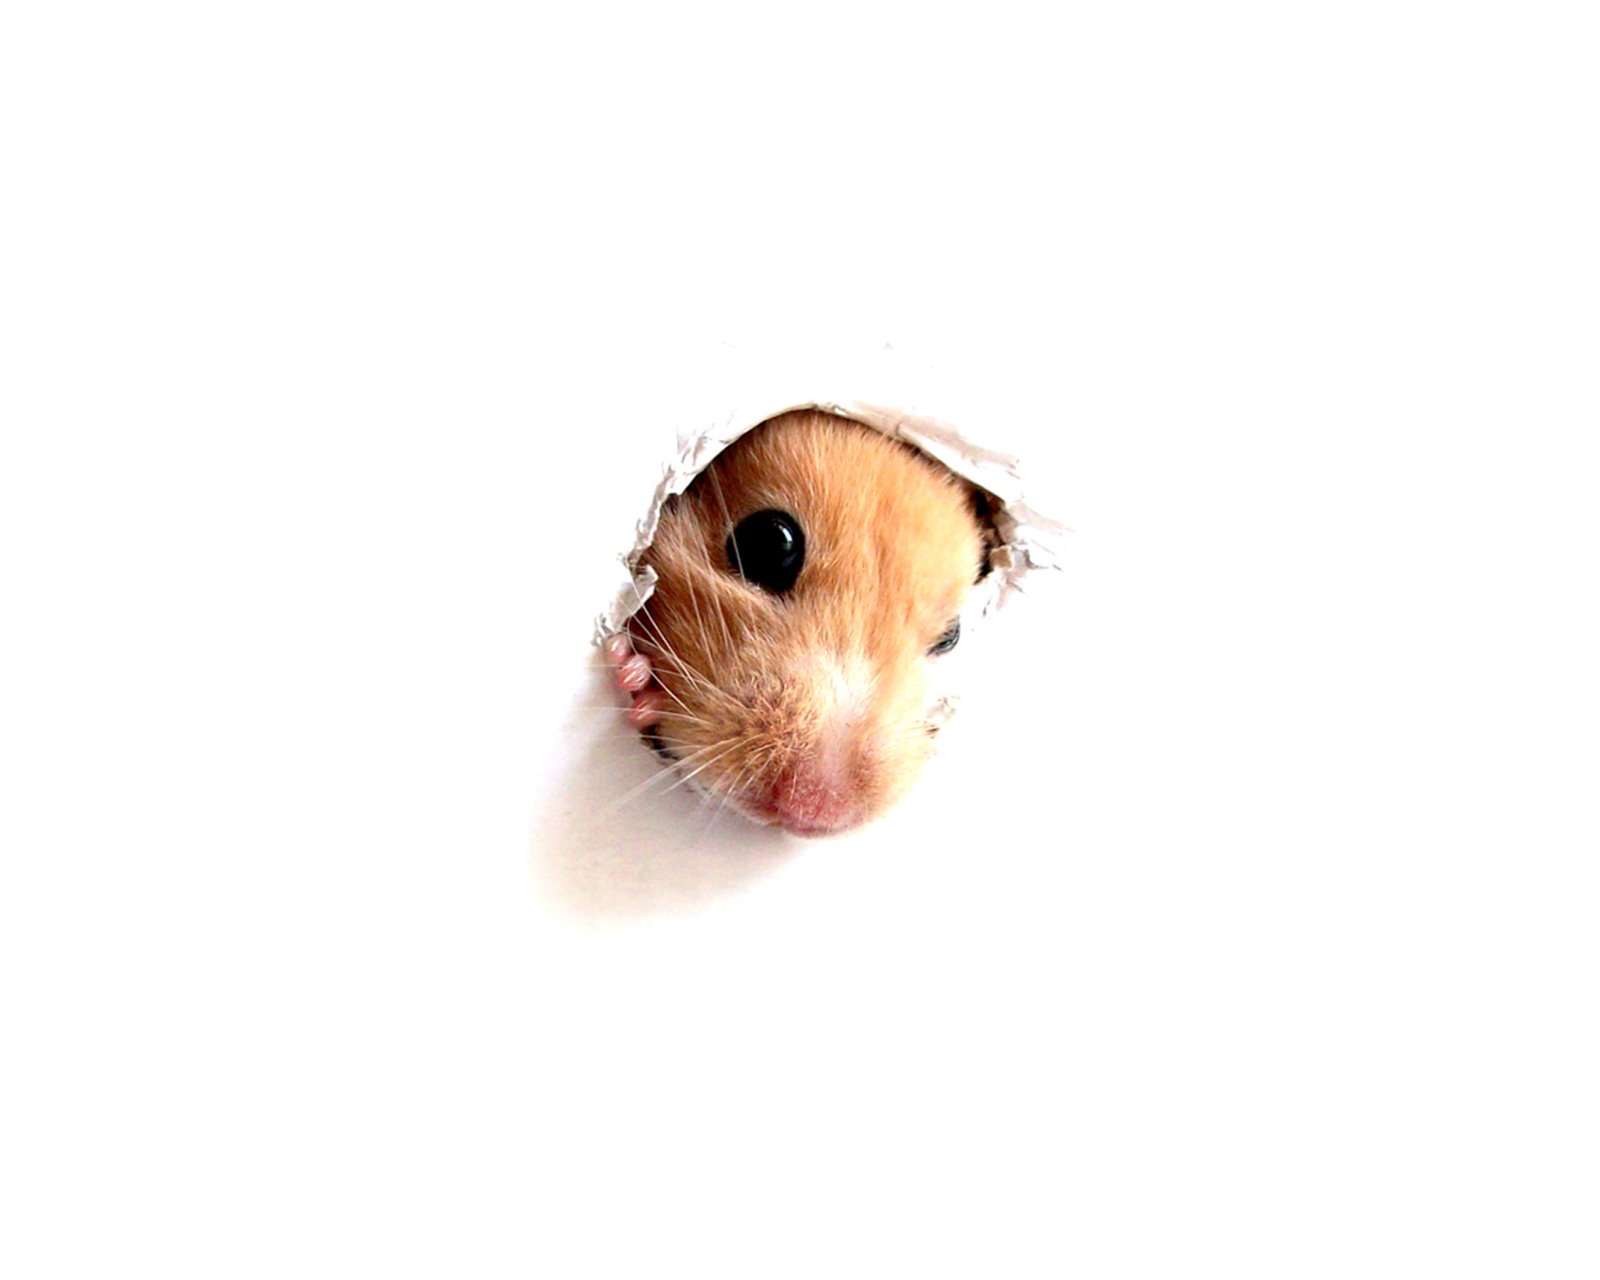 Hamster In Hole On Your Screen screenshot #1 1600x1280